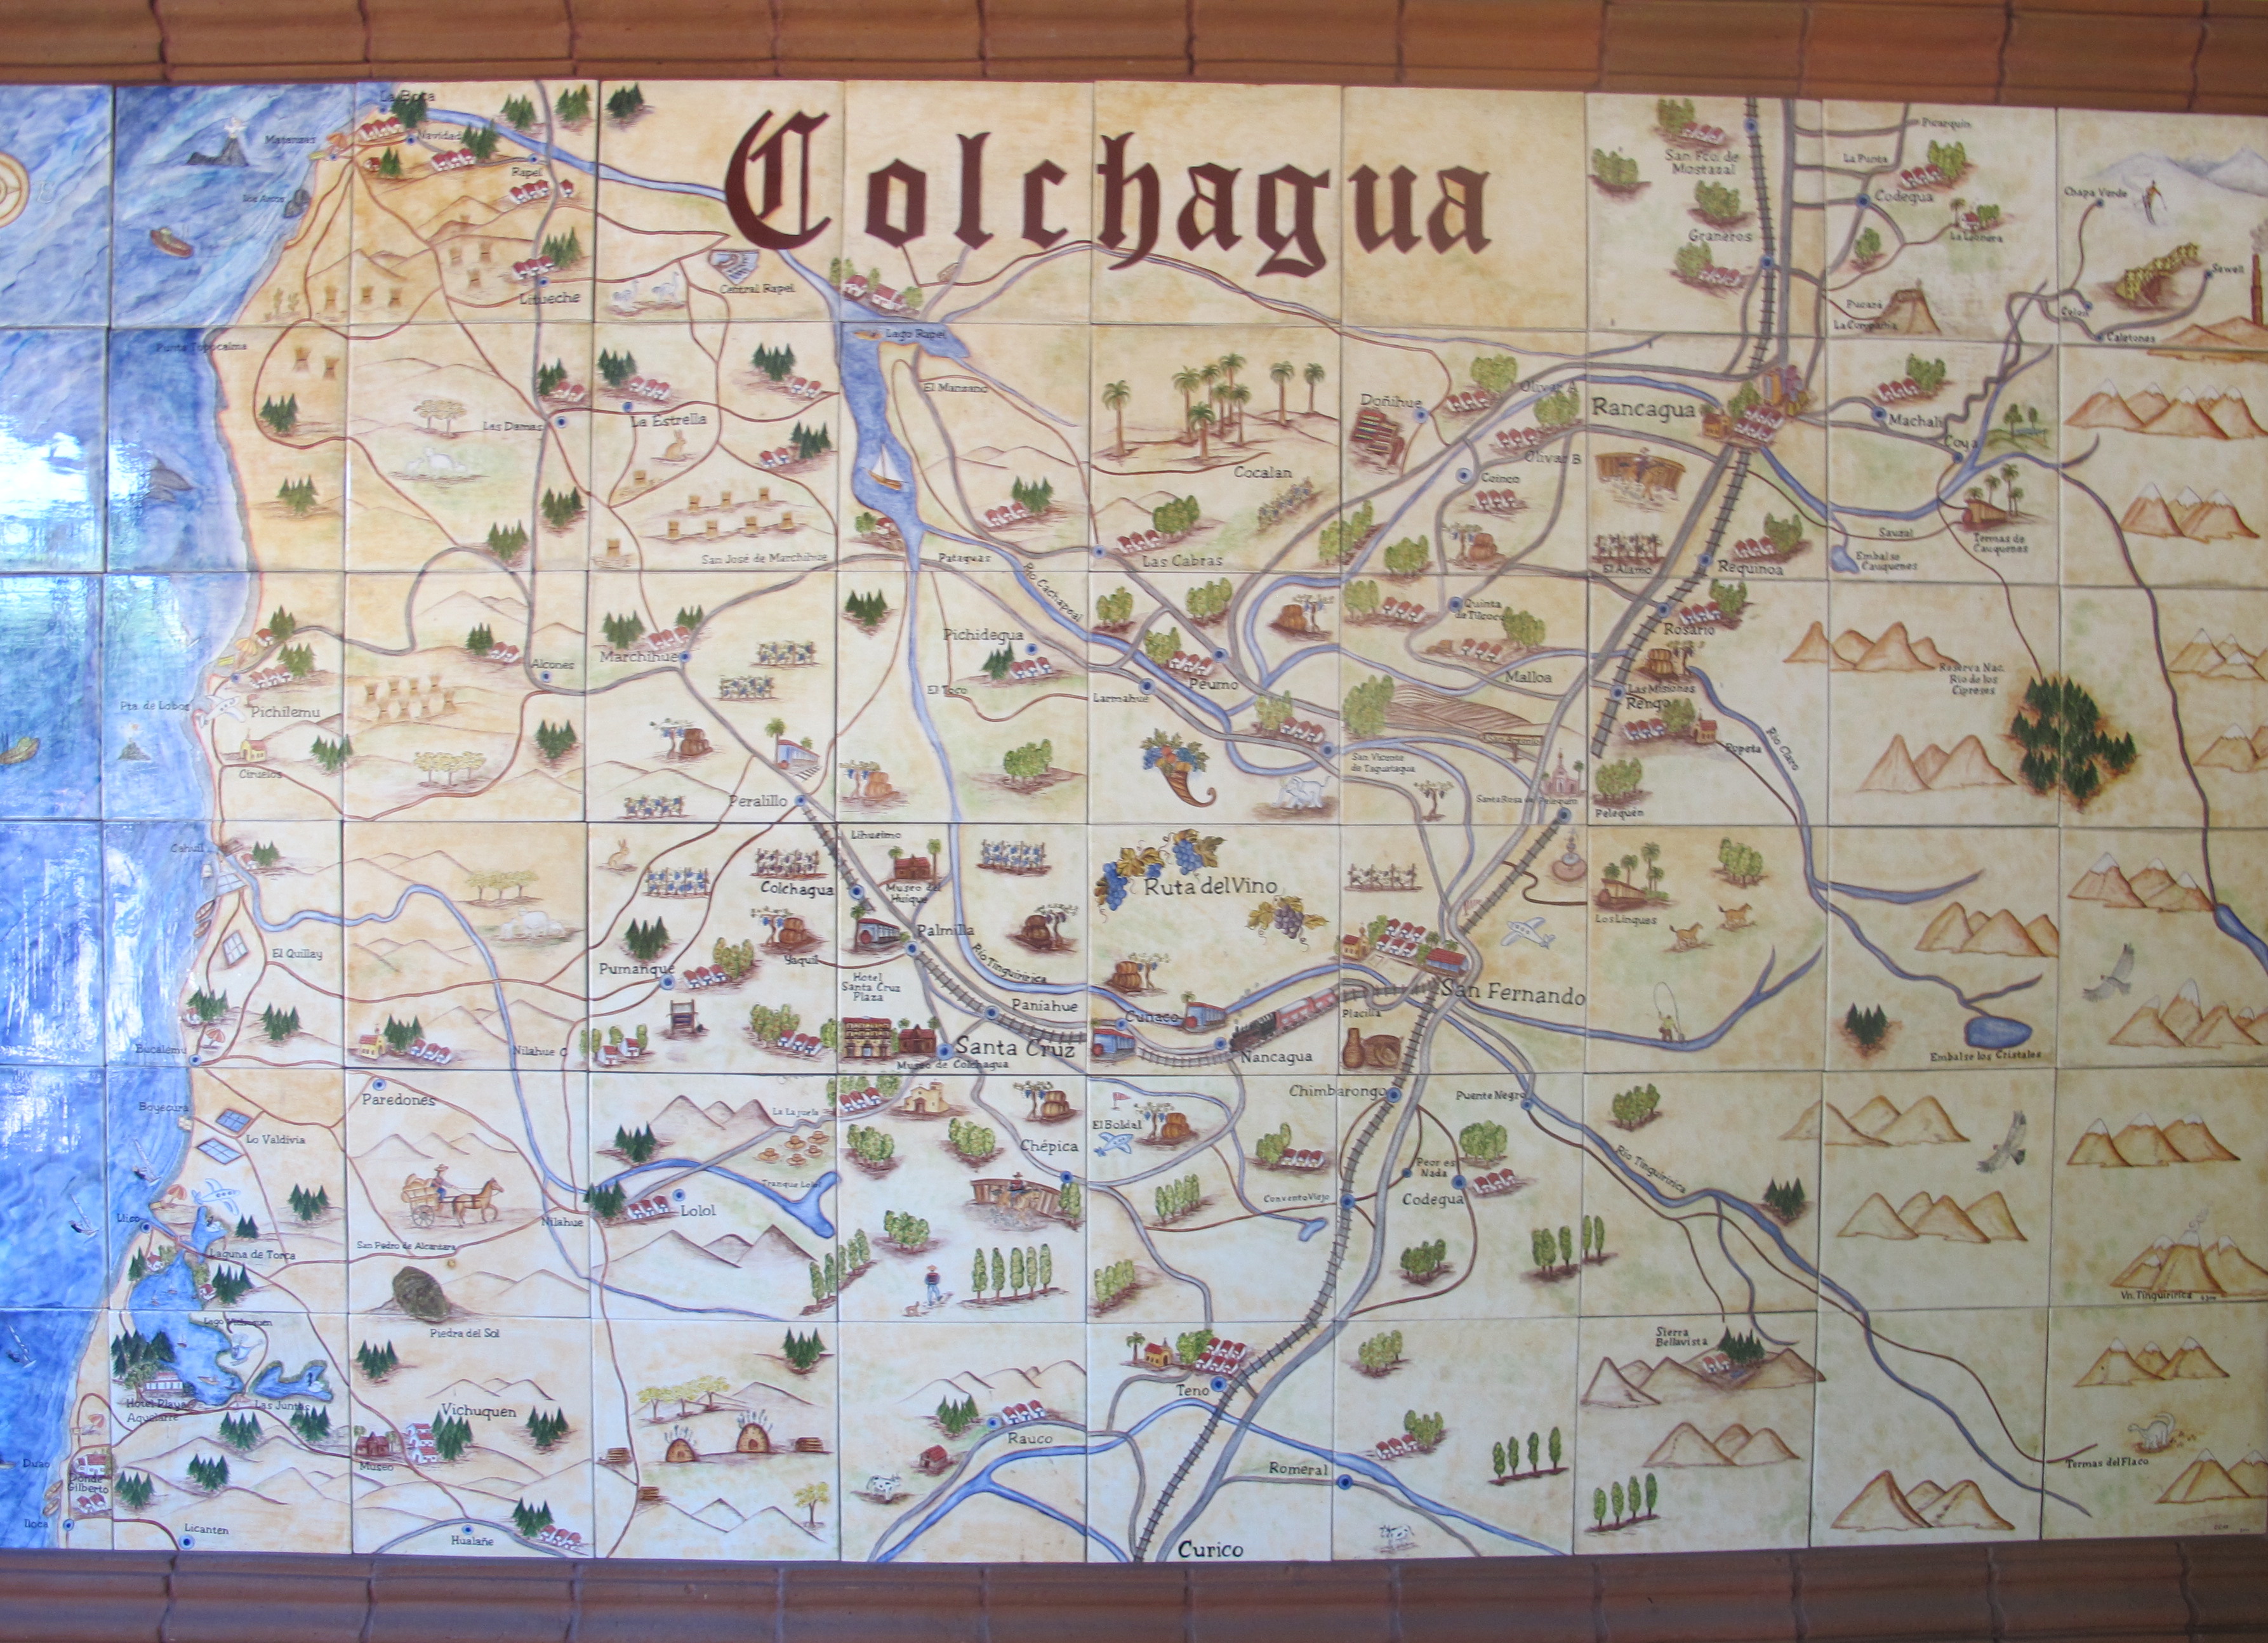 Map of Colchagua valley